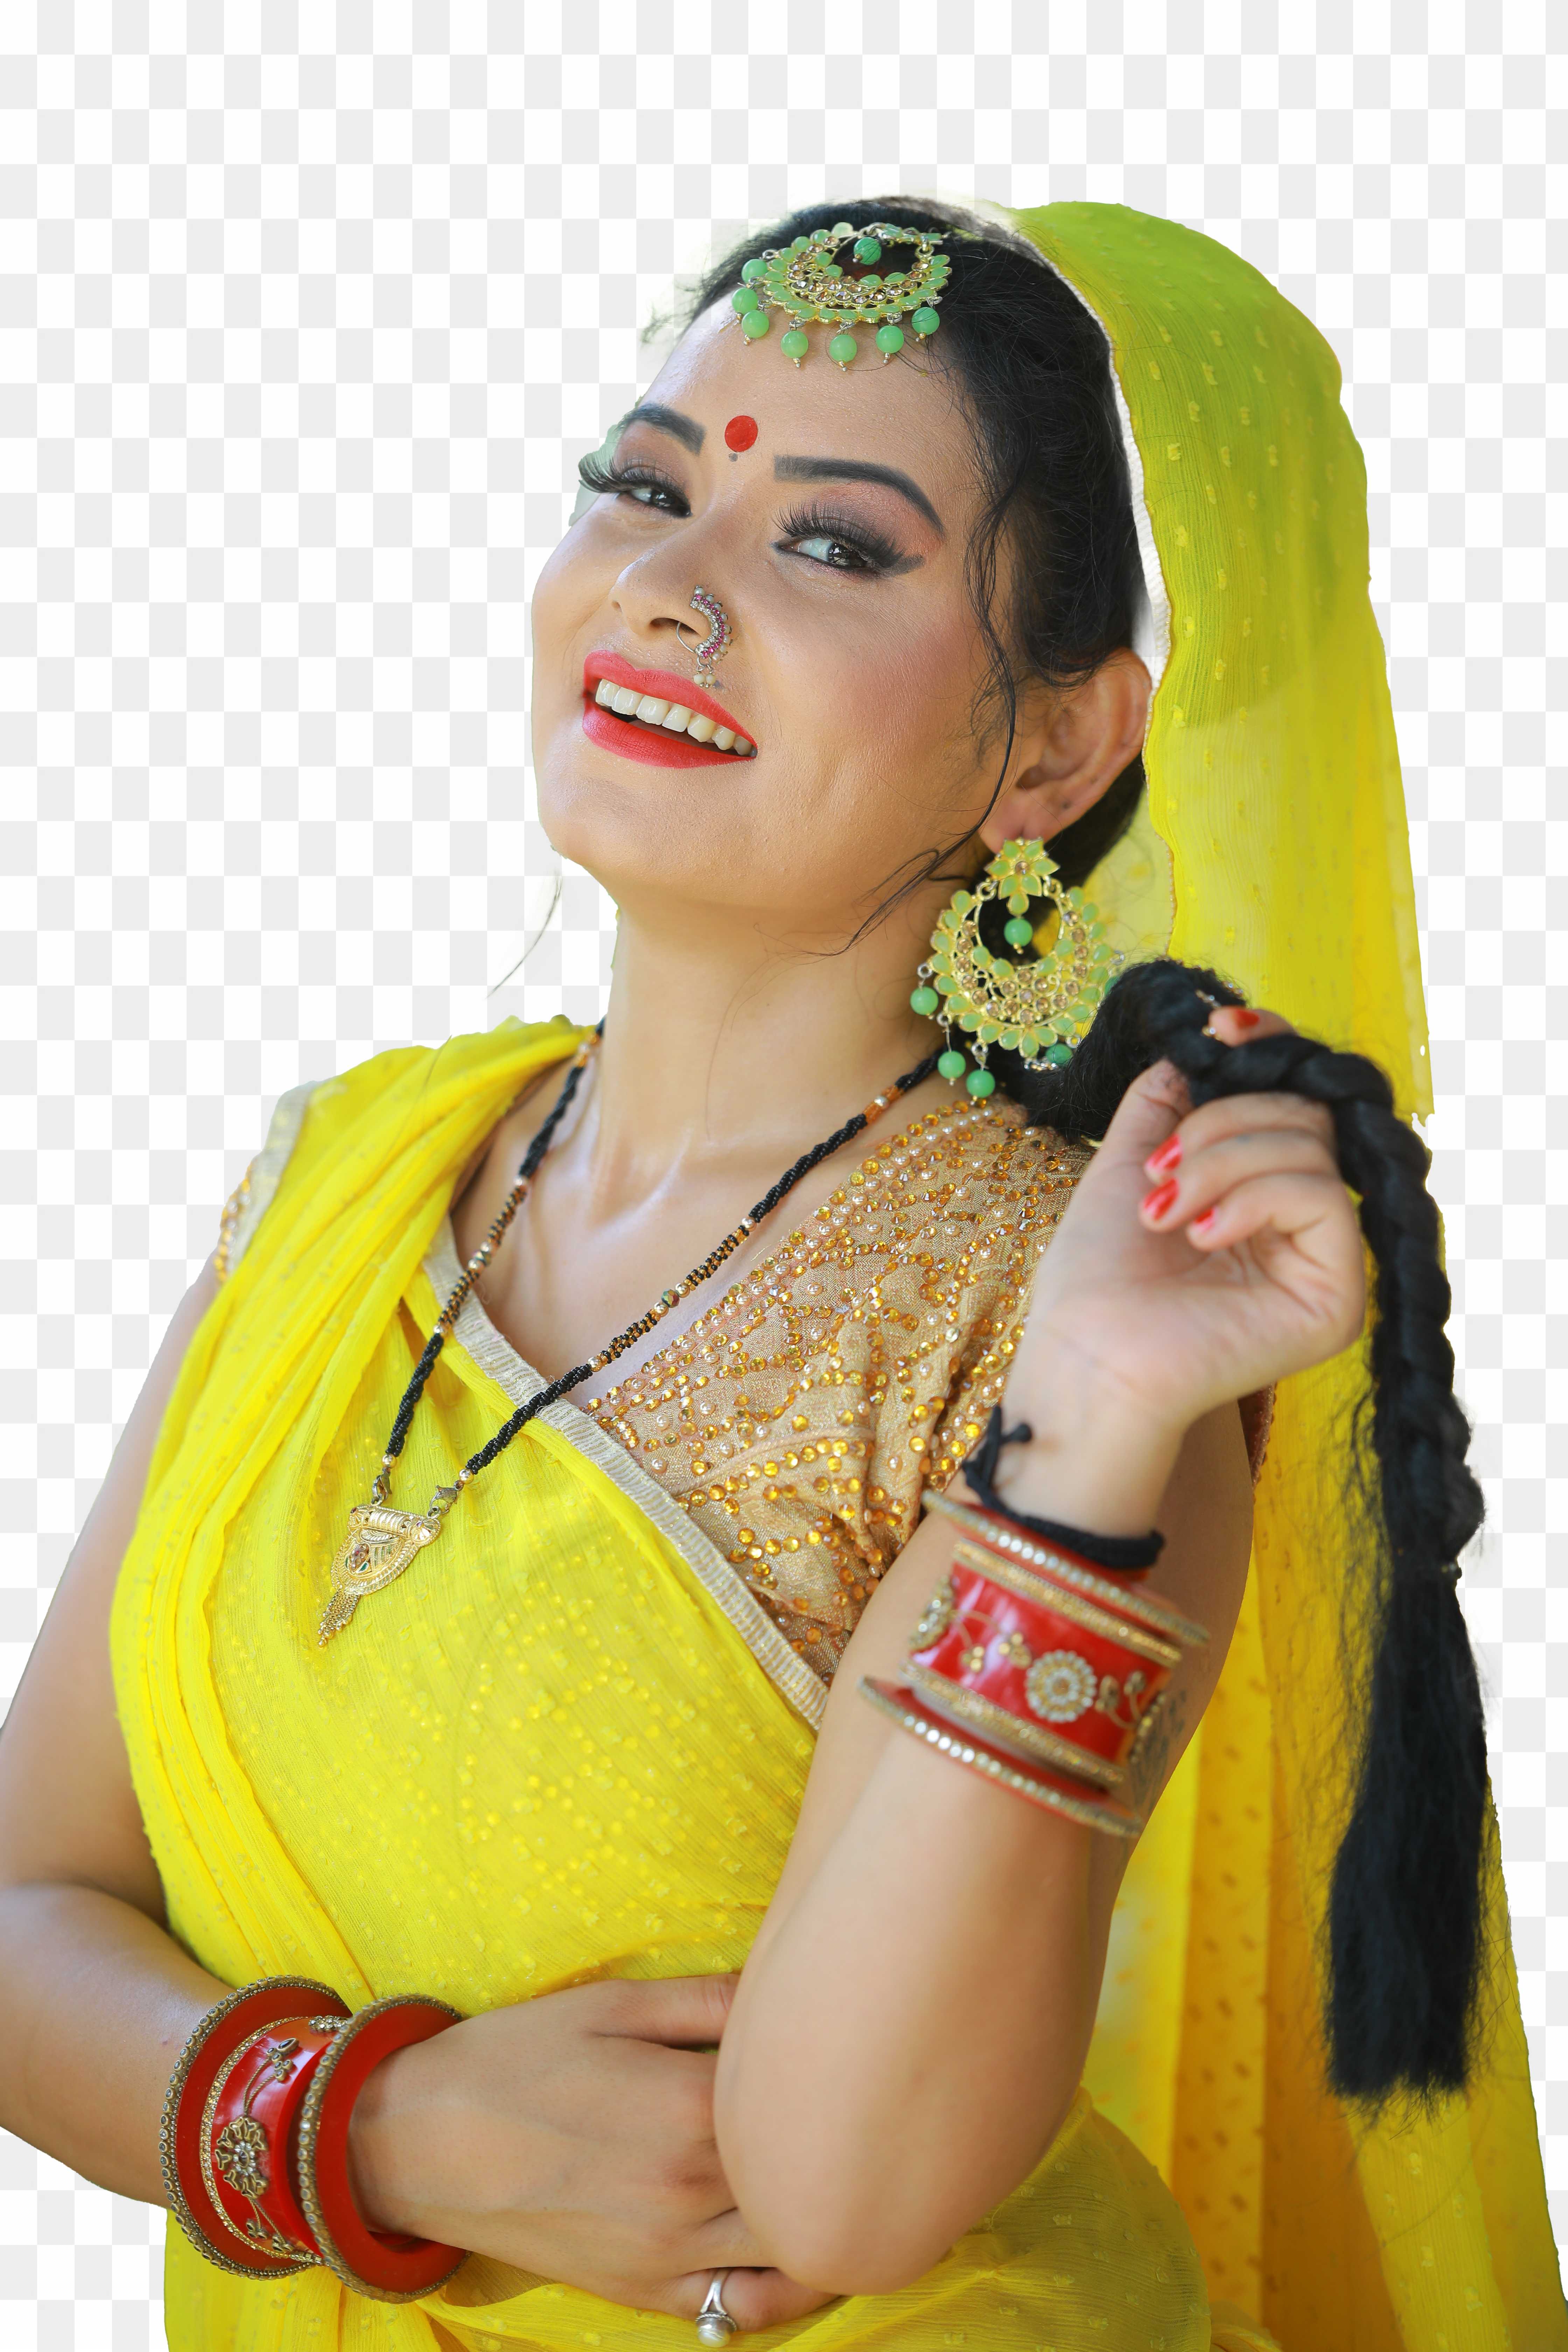 Antra sharma PNG